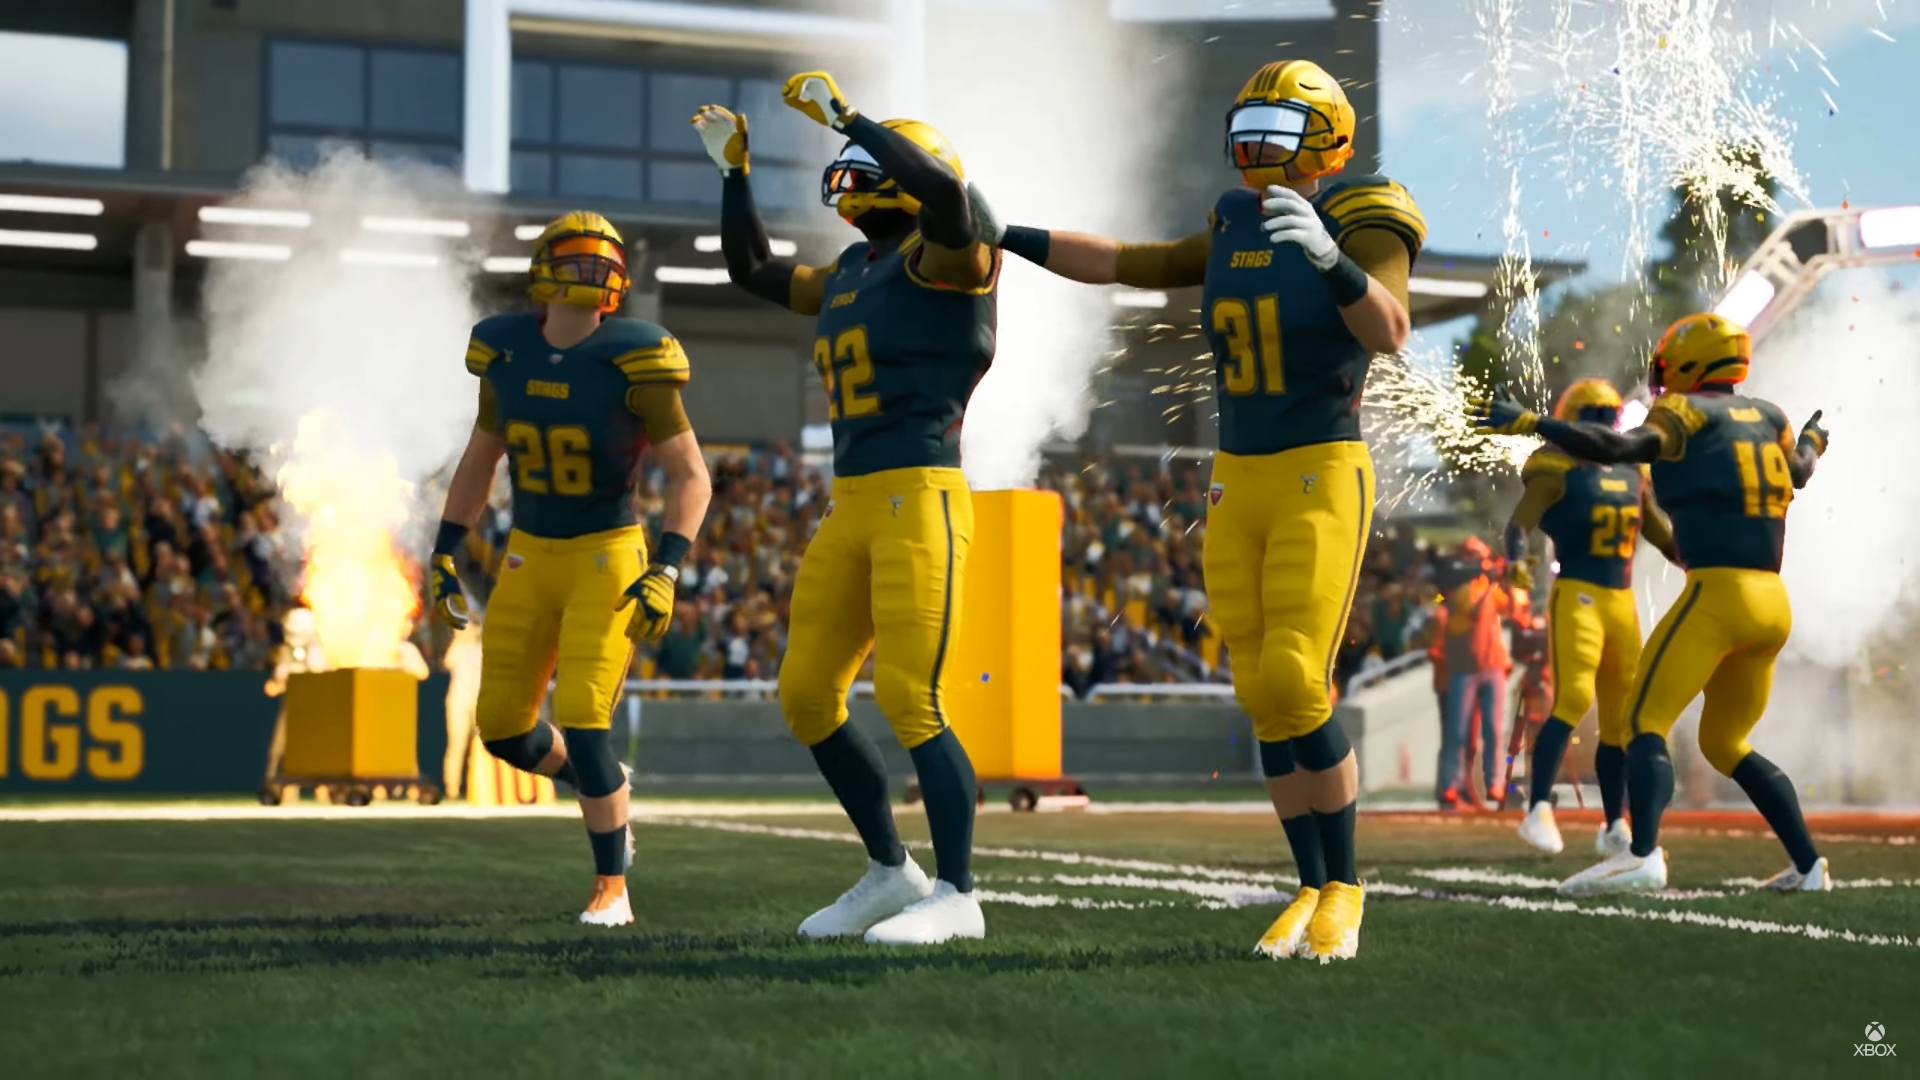 Madden NFL Rival Maximum Football Goes Free-to-Play on PS5, PS4